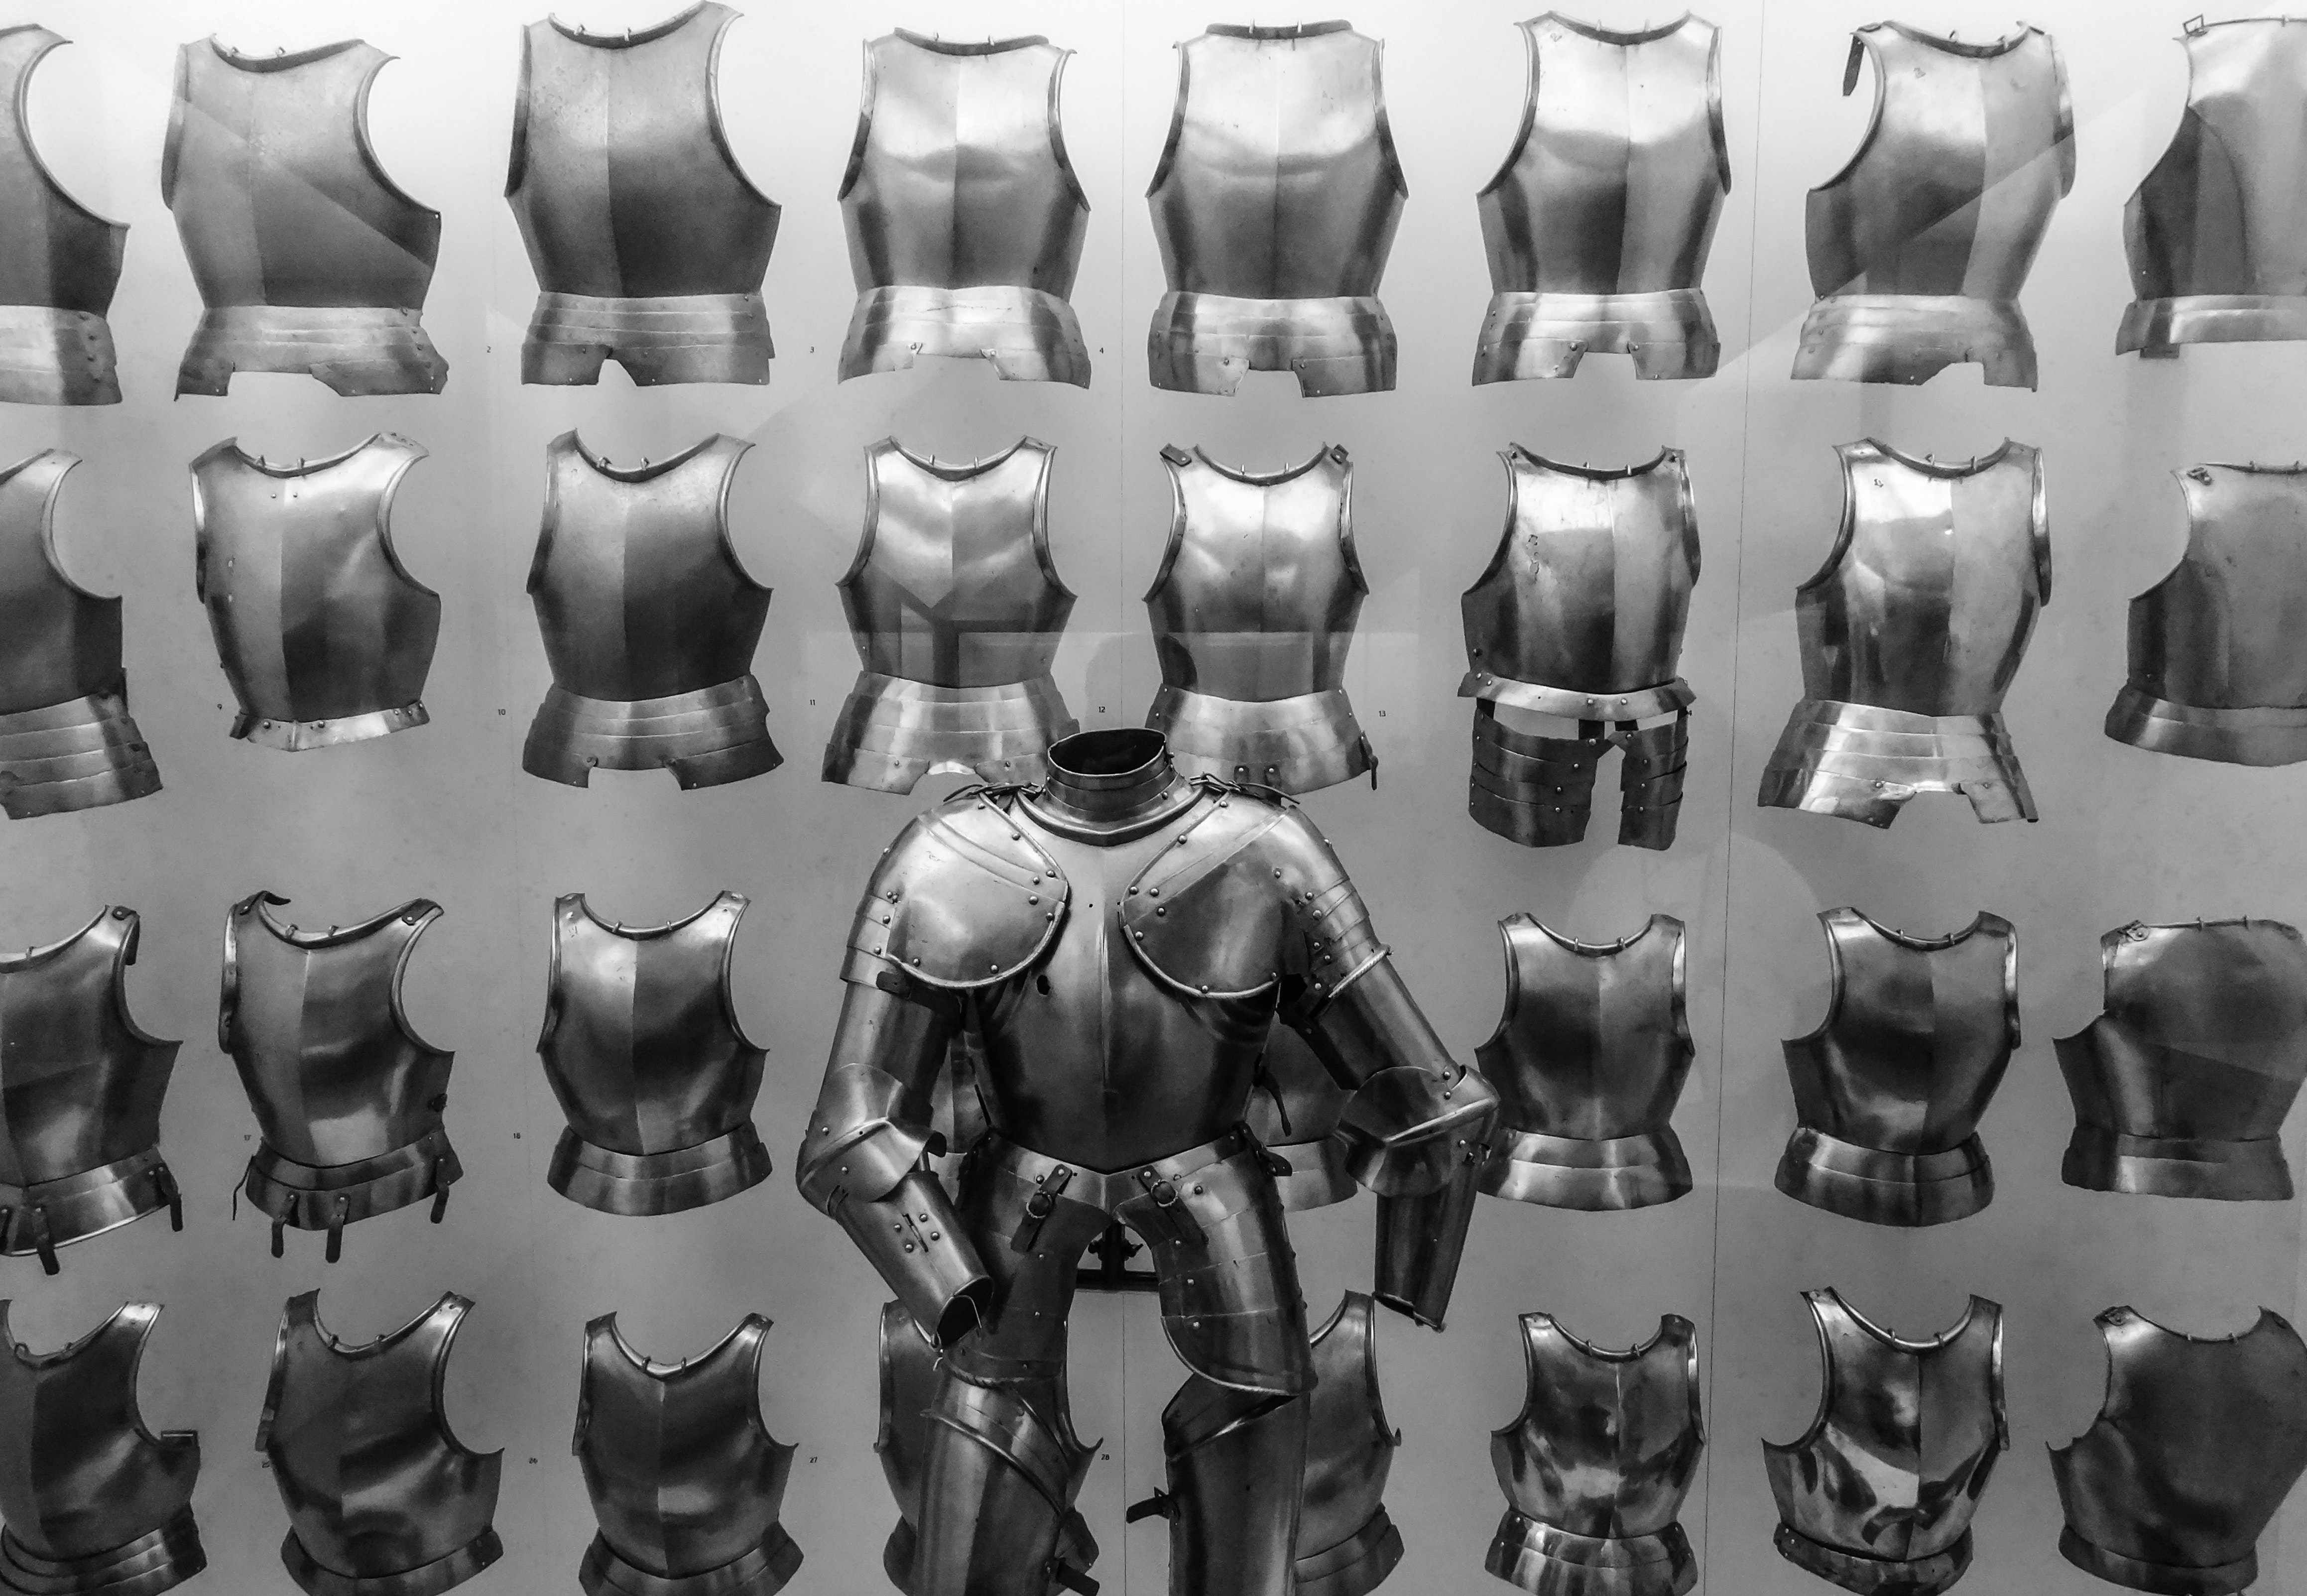 Stainless steel armor photo